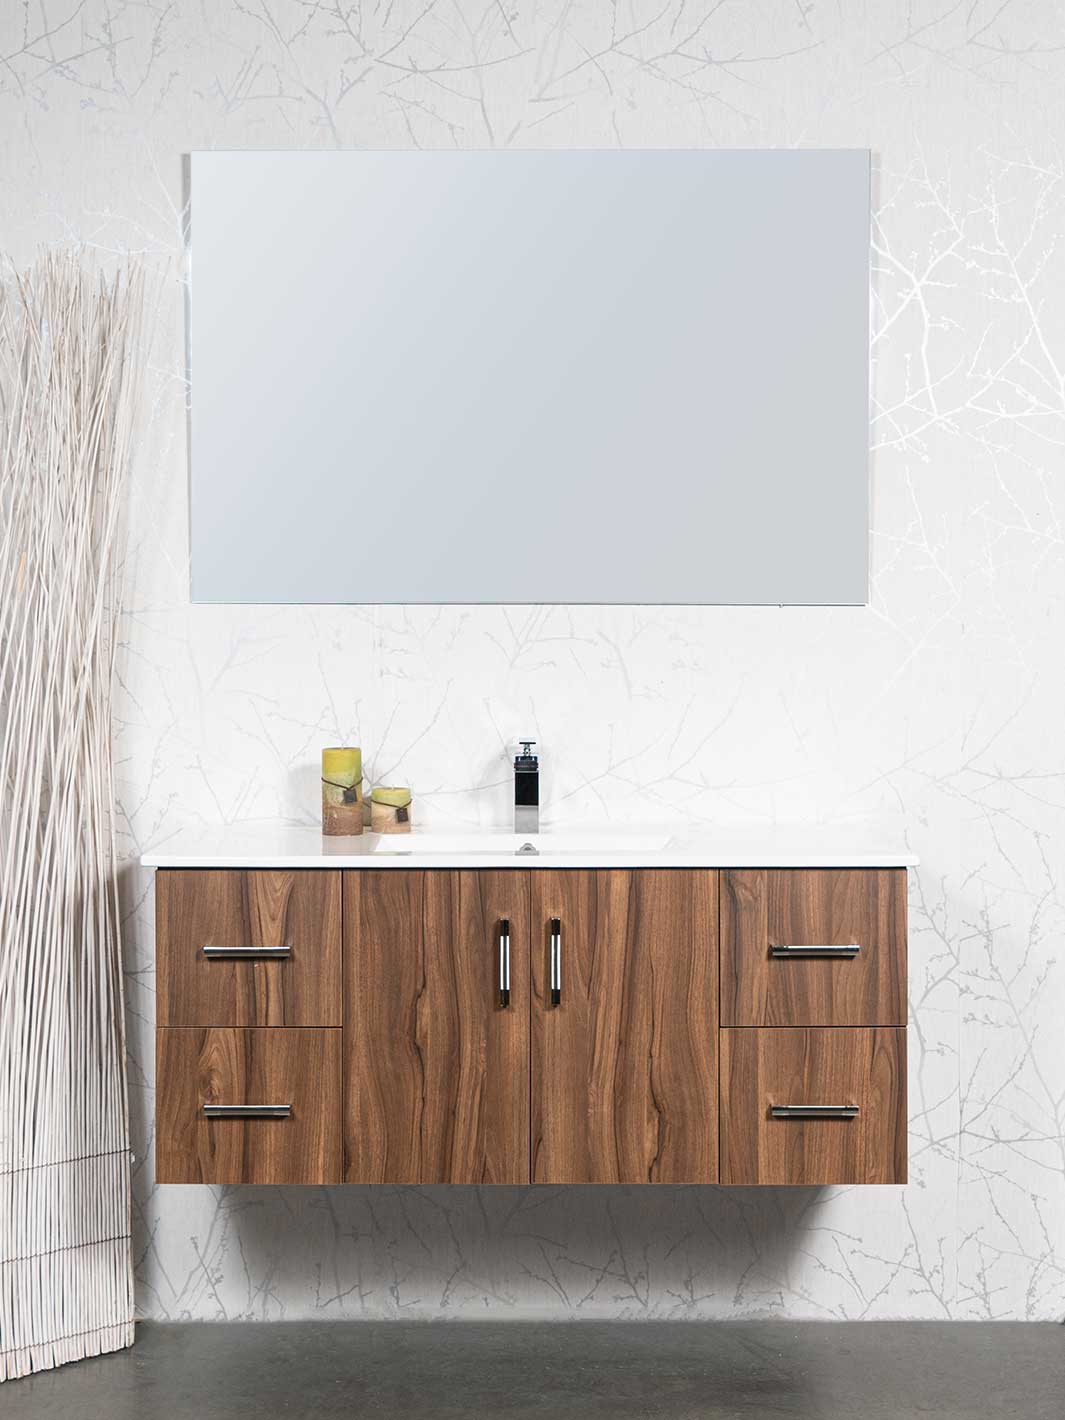 48 inch floating vanity in wood grain finish. there are two drawers on either side and a sink in the center. large unframed mirror